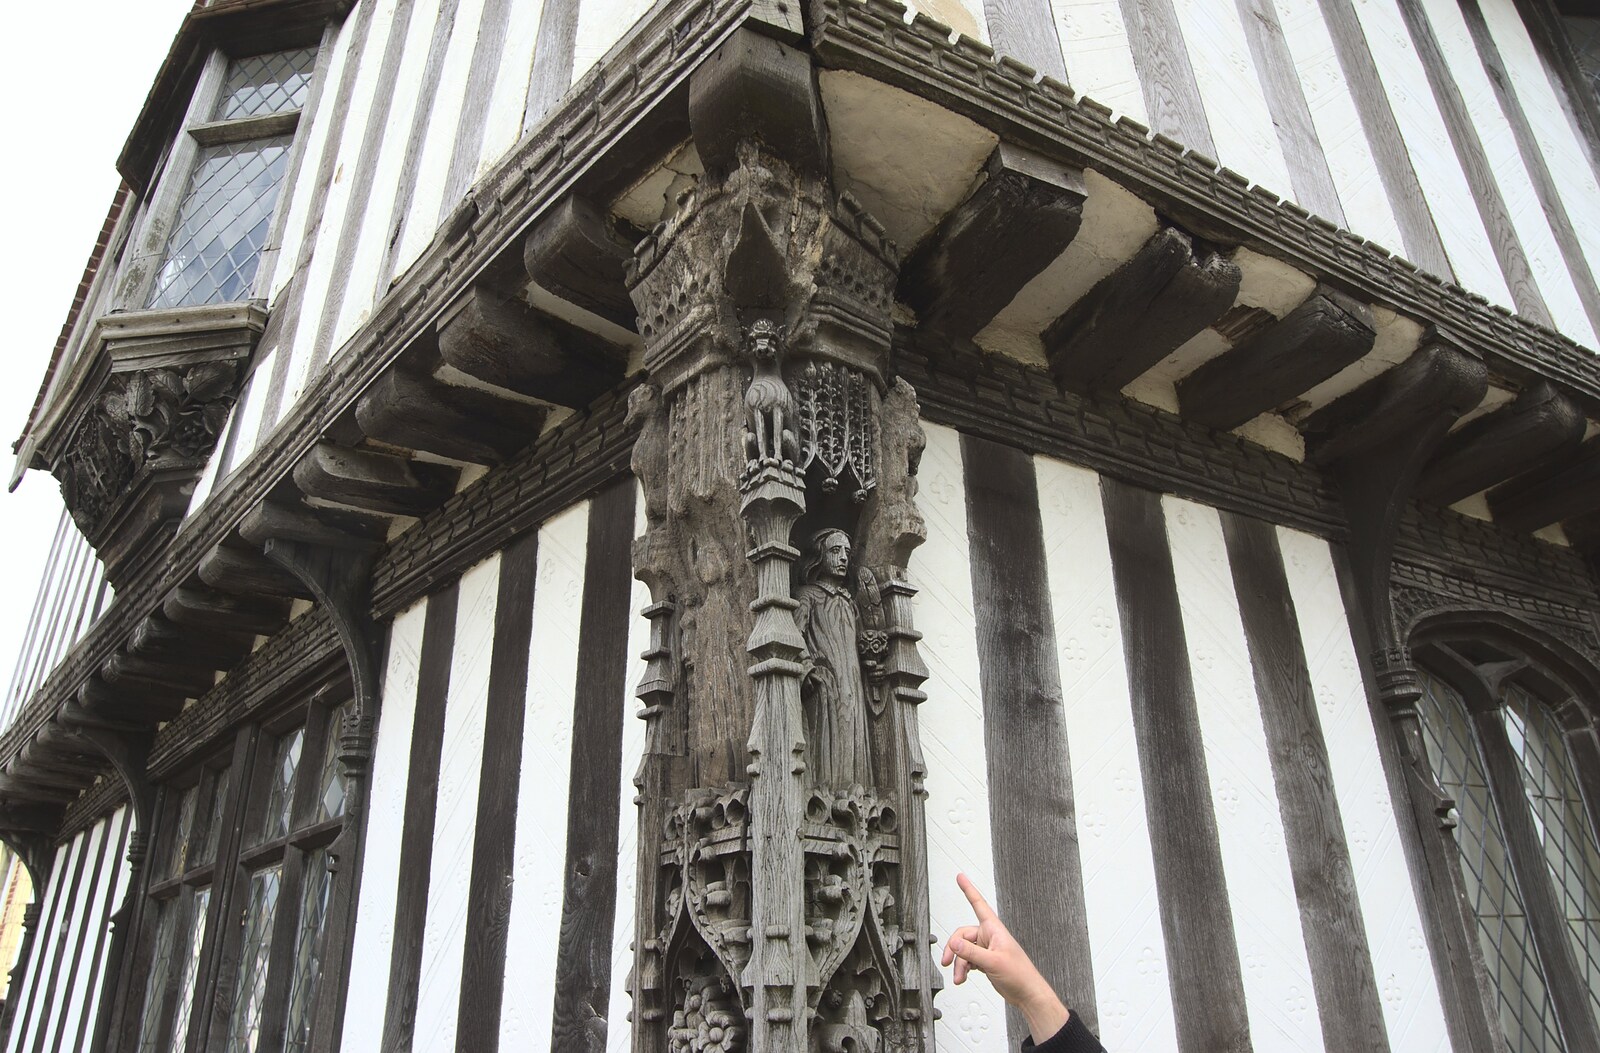 Rachel points to some impressive carvings from A Visit from Rachel and Sam, Brome, Suffolk - 26th April 2009